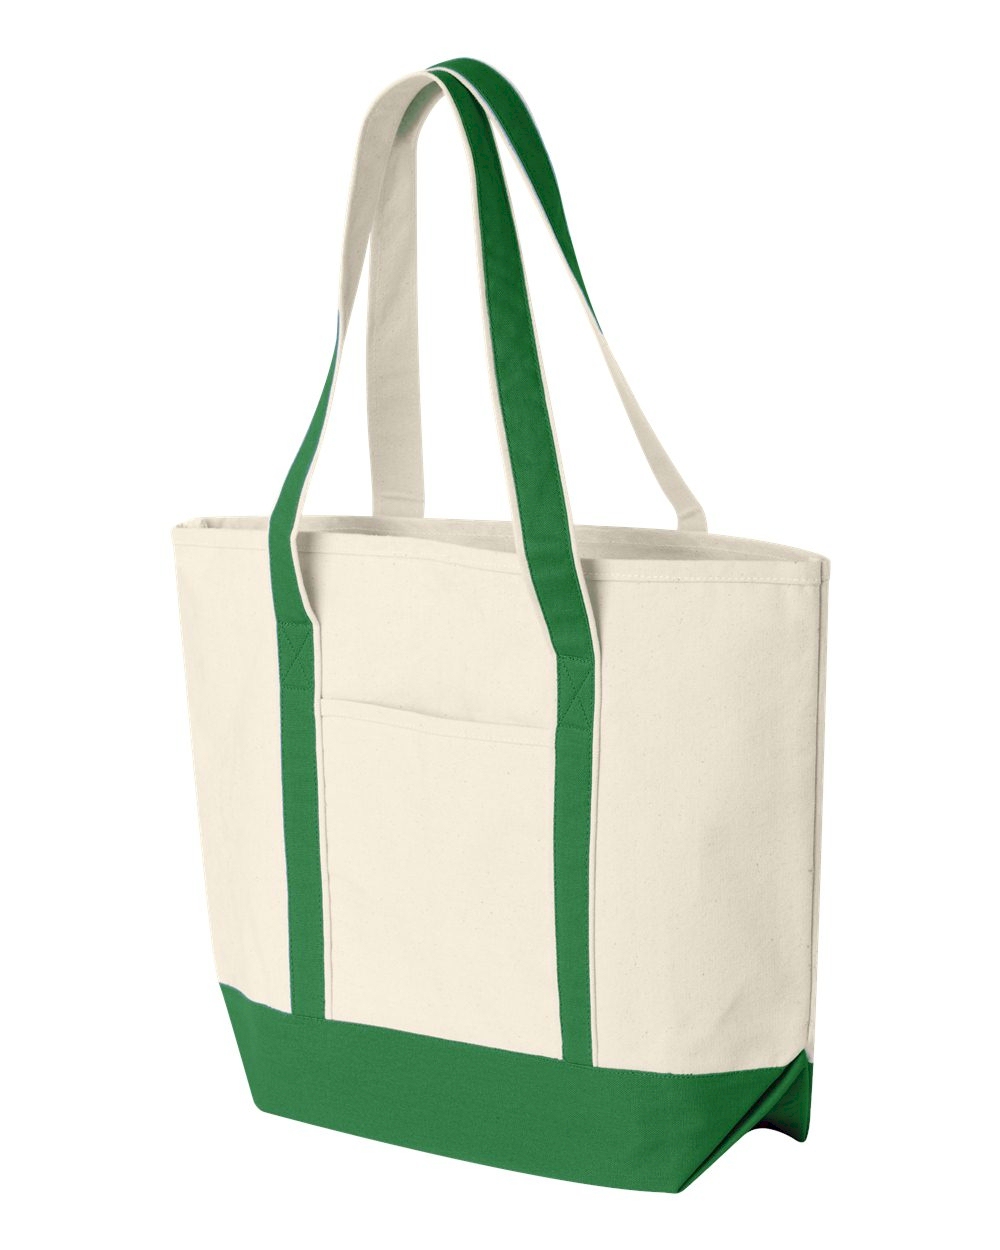 Beach Tote Bag Embroidery Blanks - NATURAL/CLOVER